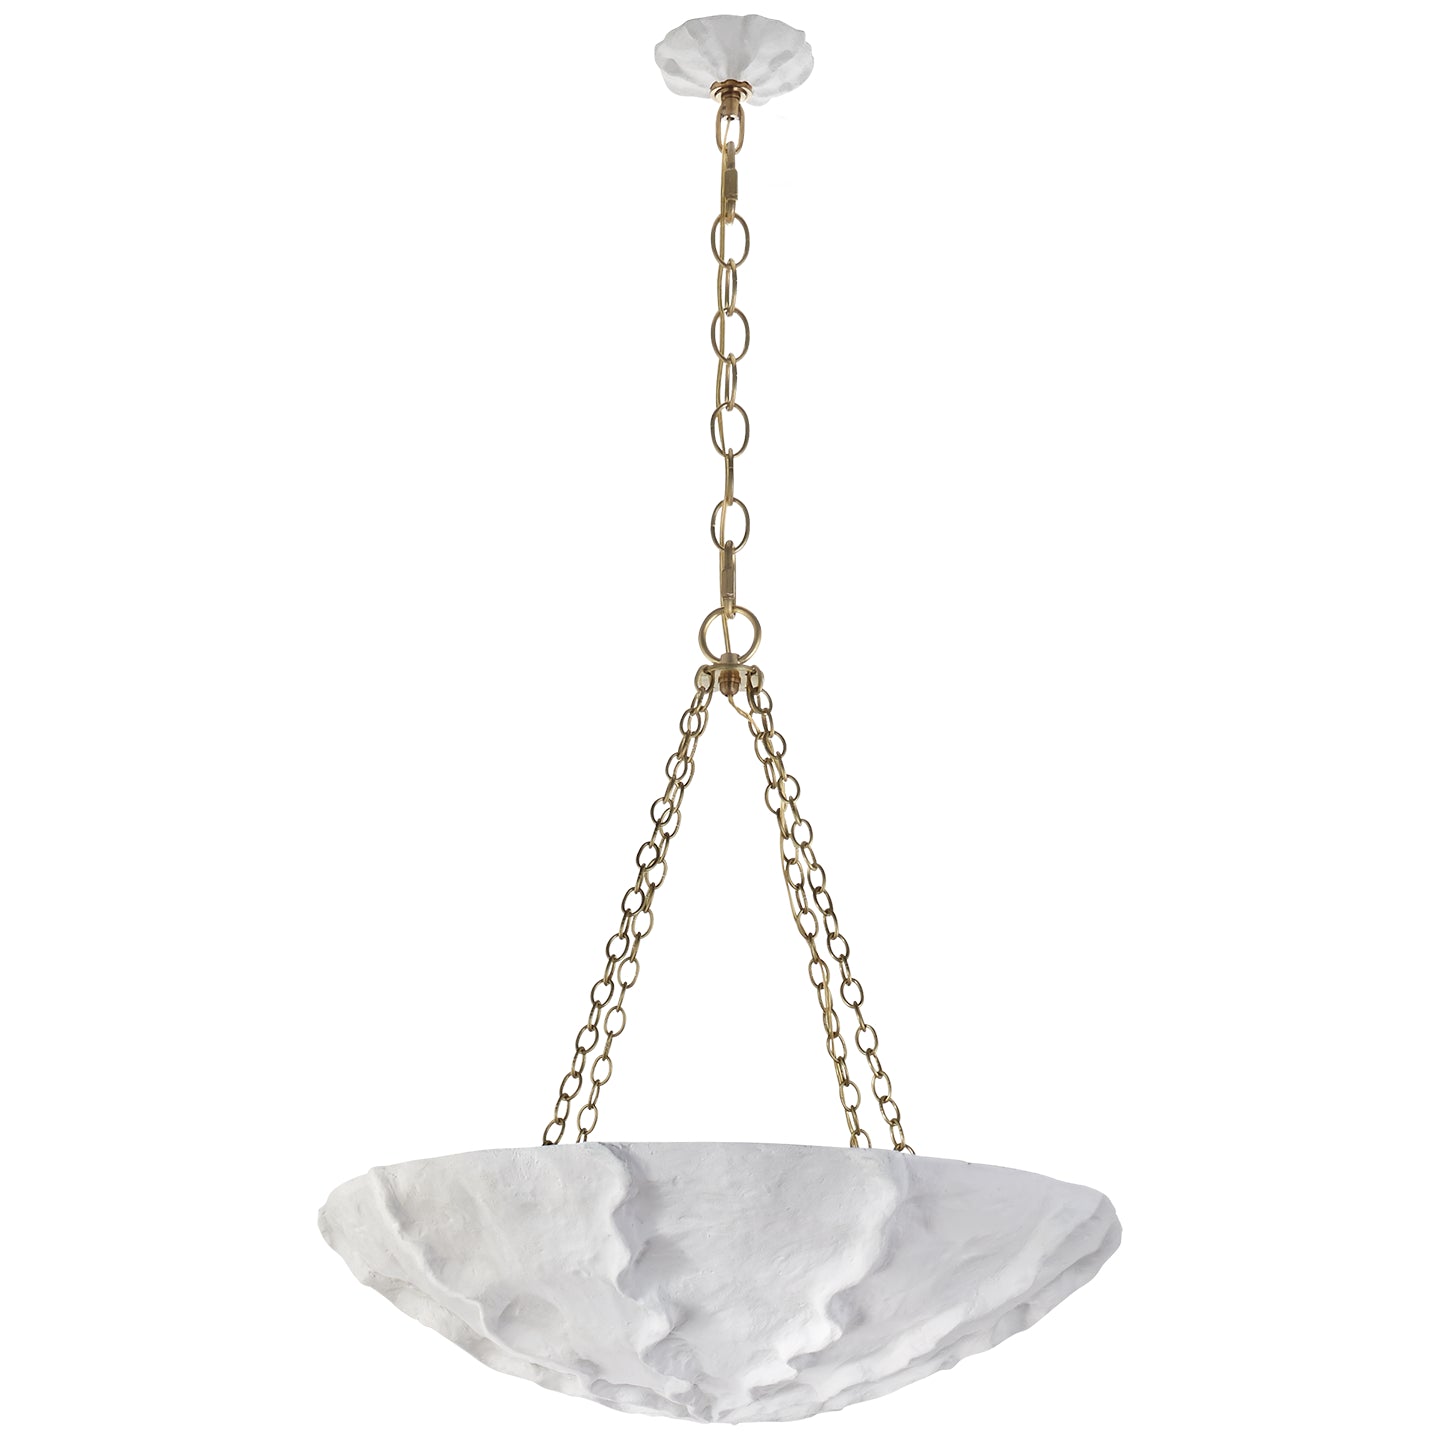 Load image into Gallery viewer, Visual Comfort Signature - ARN 5426PW - Four Light Chandelier - Benit - Plaster White
